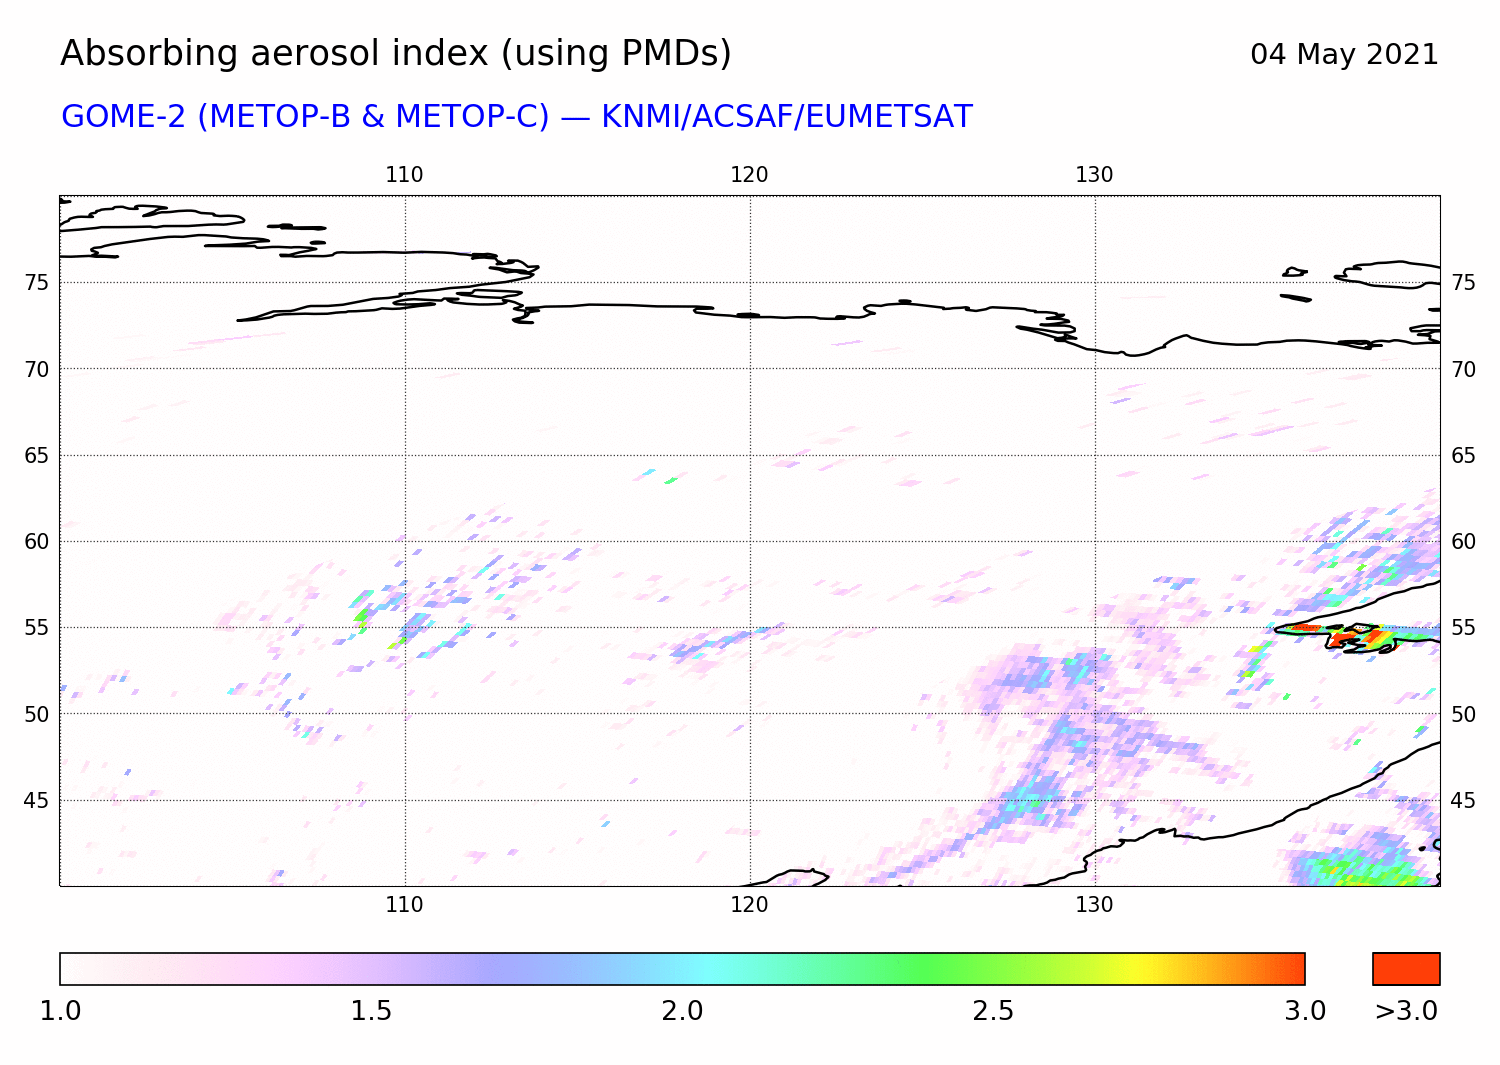 GOME-2 - Absorbing aerosol index of 04 May 2021